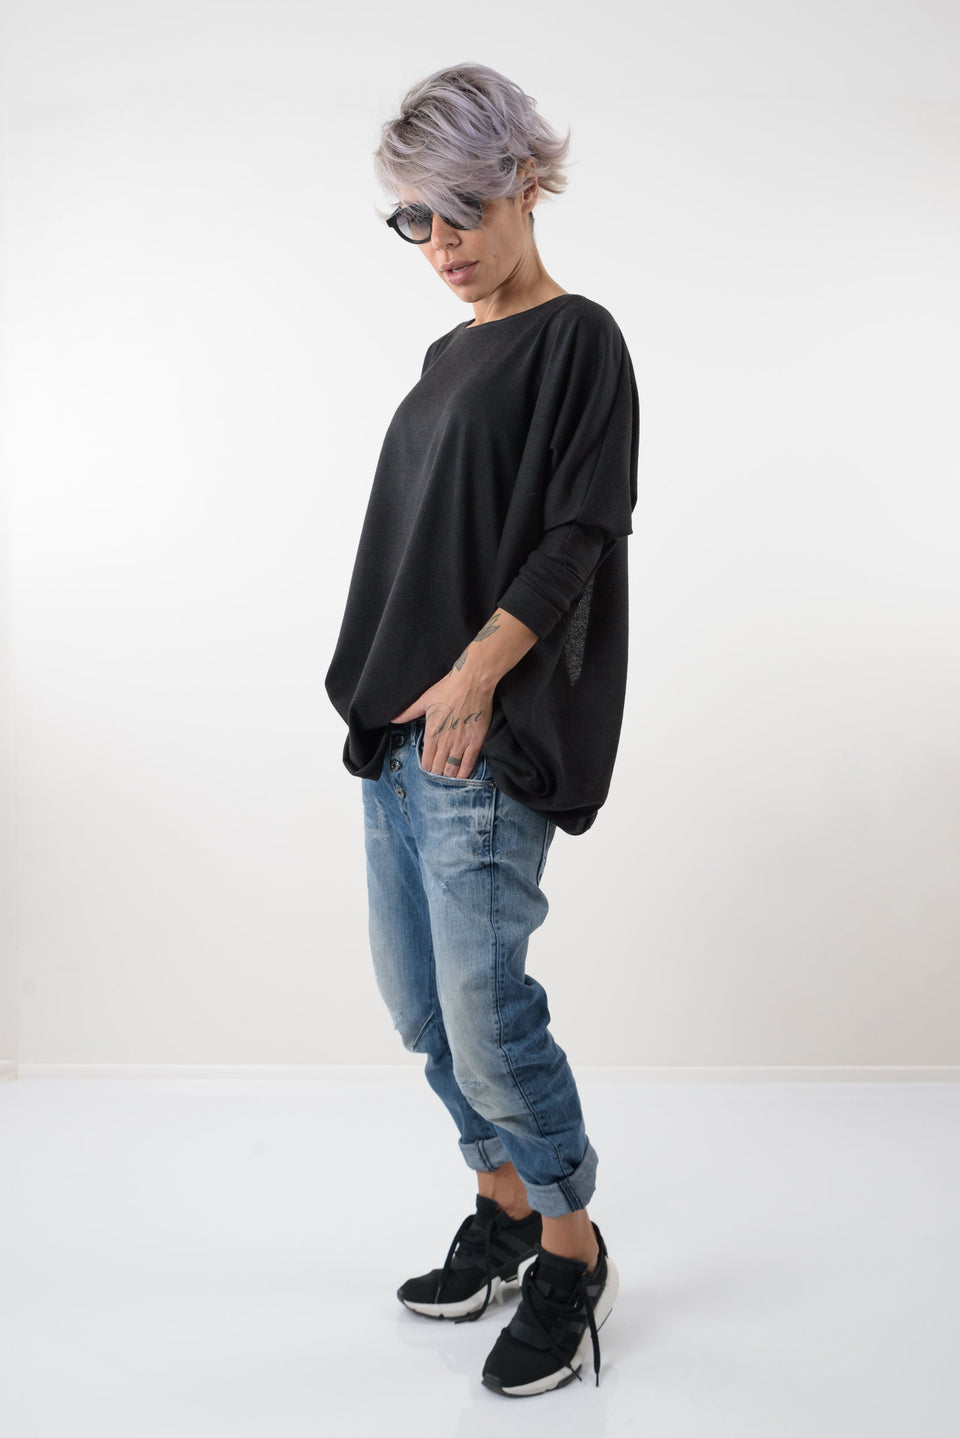 Black Oversize Asymmetric Knitted Open Back Blouse - Clothes By Locker Room